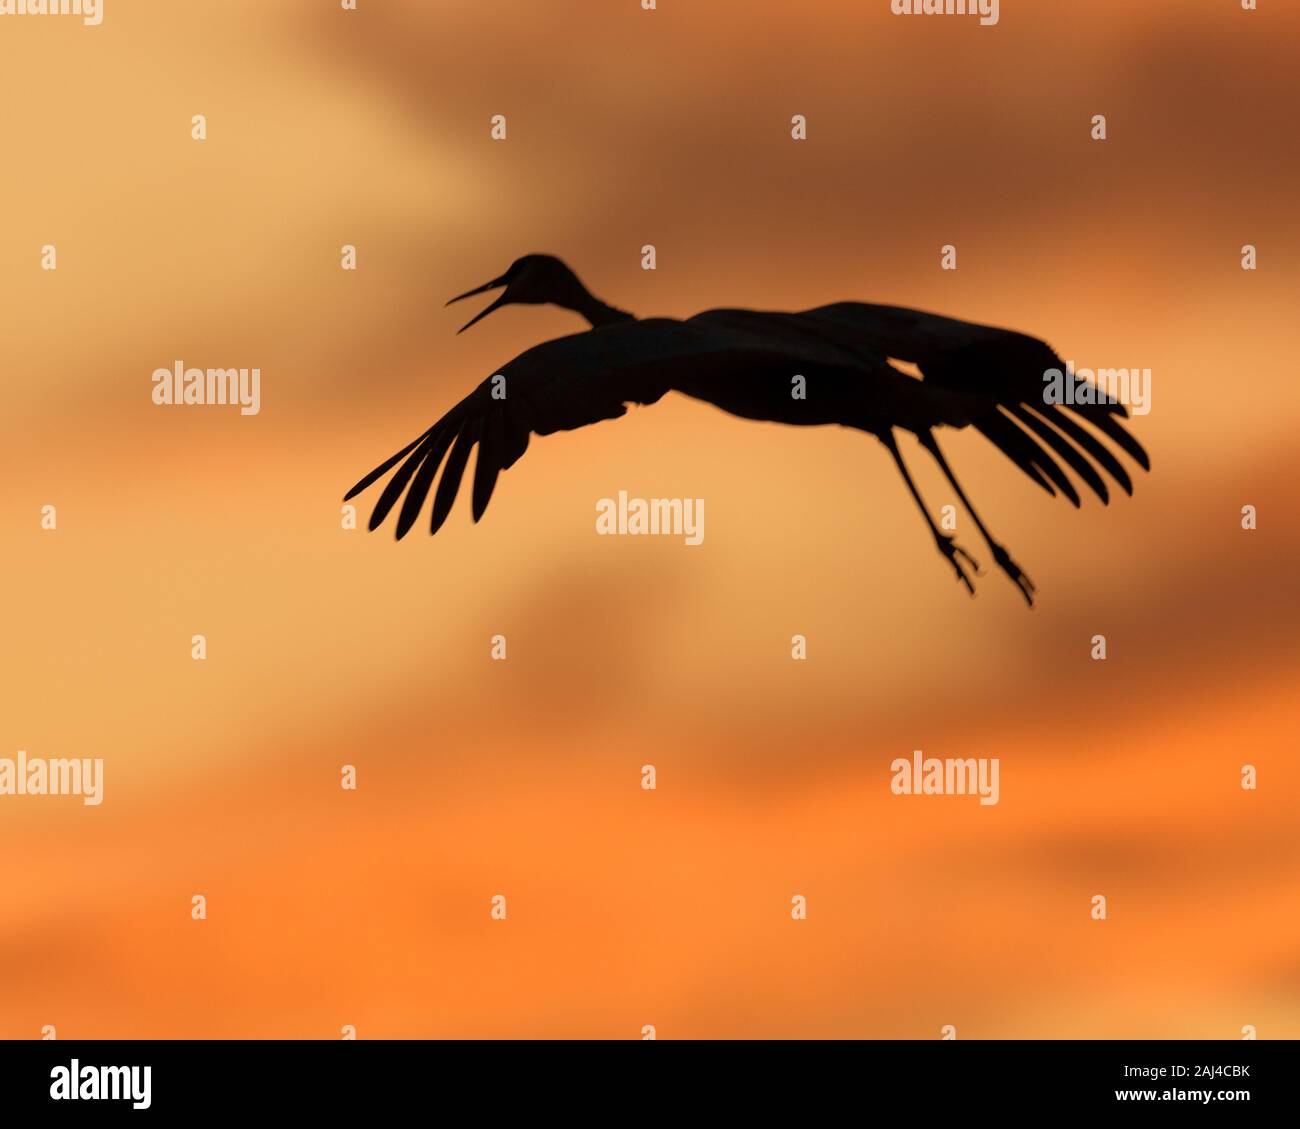 Sandhill crane in silhouette in flight at sunset at the Bosque del Apache National Wildlife Refuge in New Mexico Stock Photo